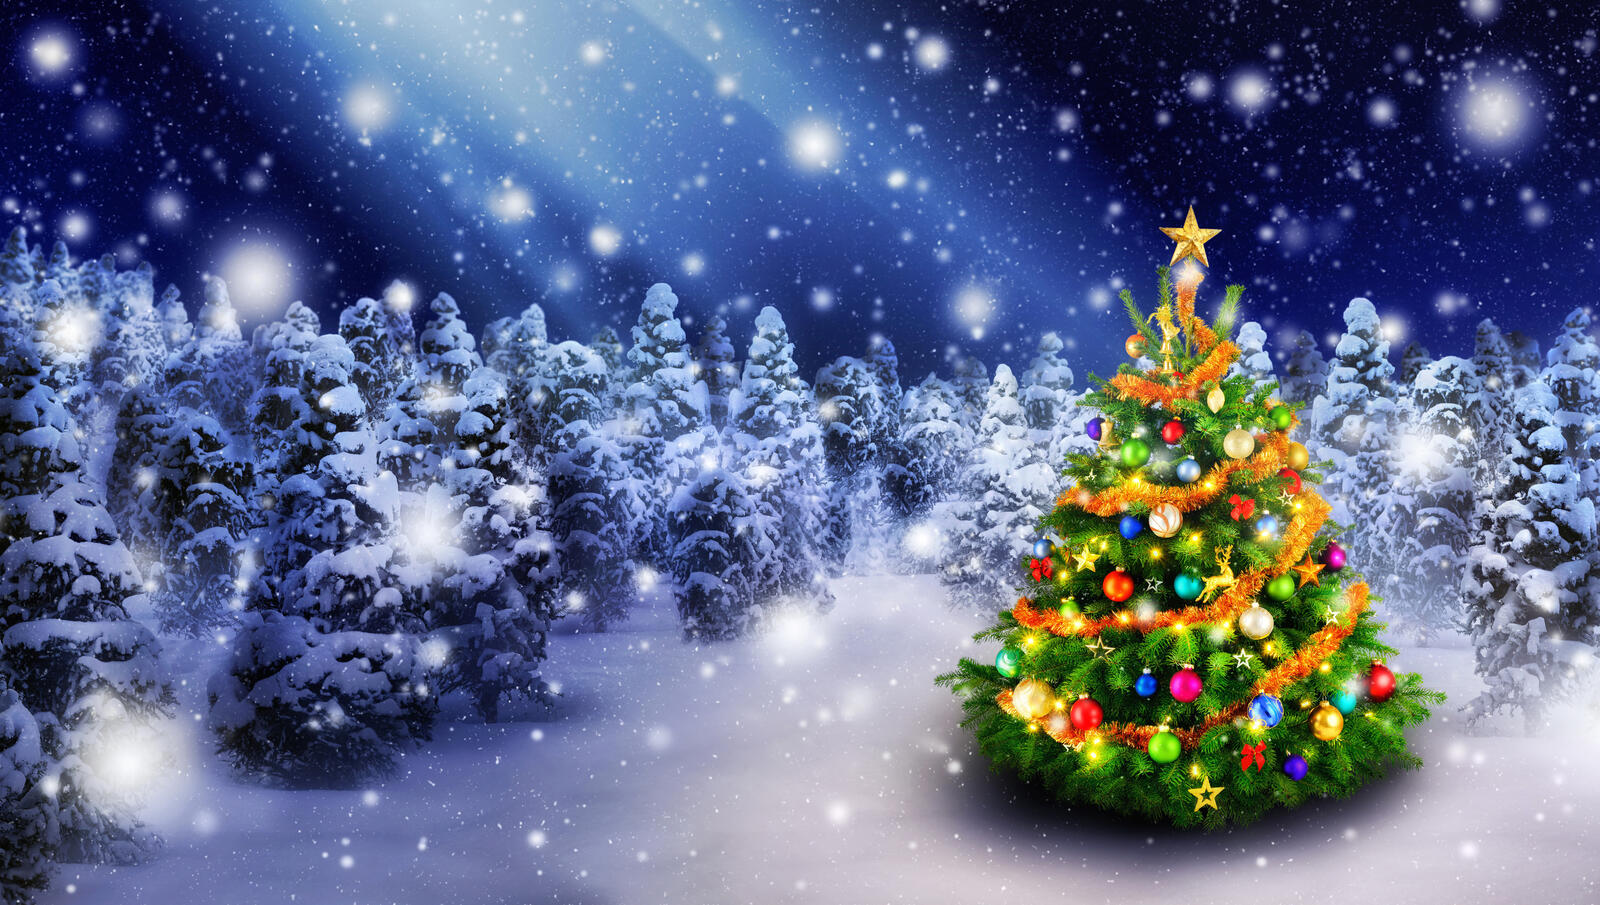 Wallpapers new year wallpapers christmas background christmas tree on the desktop